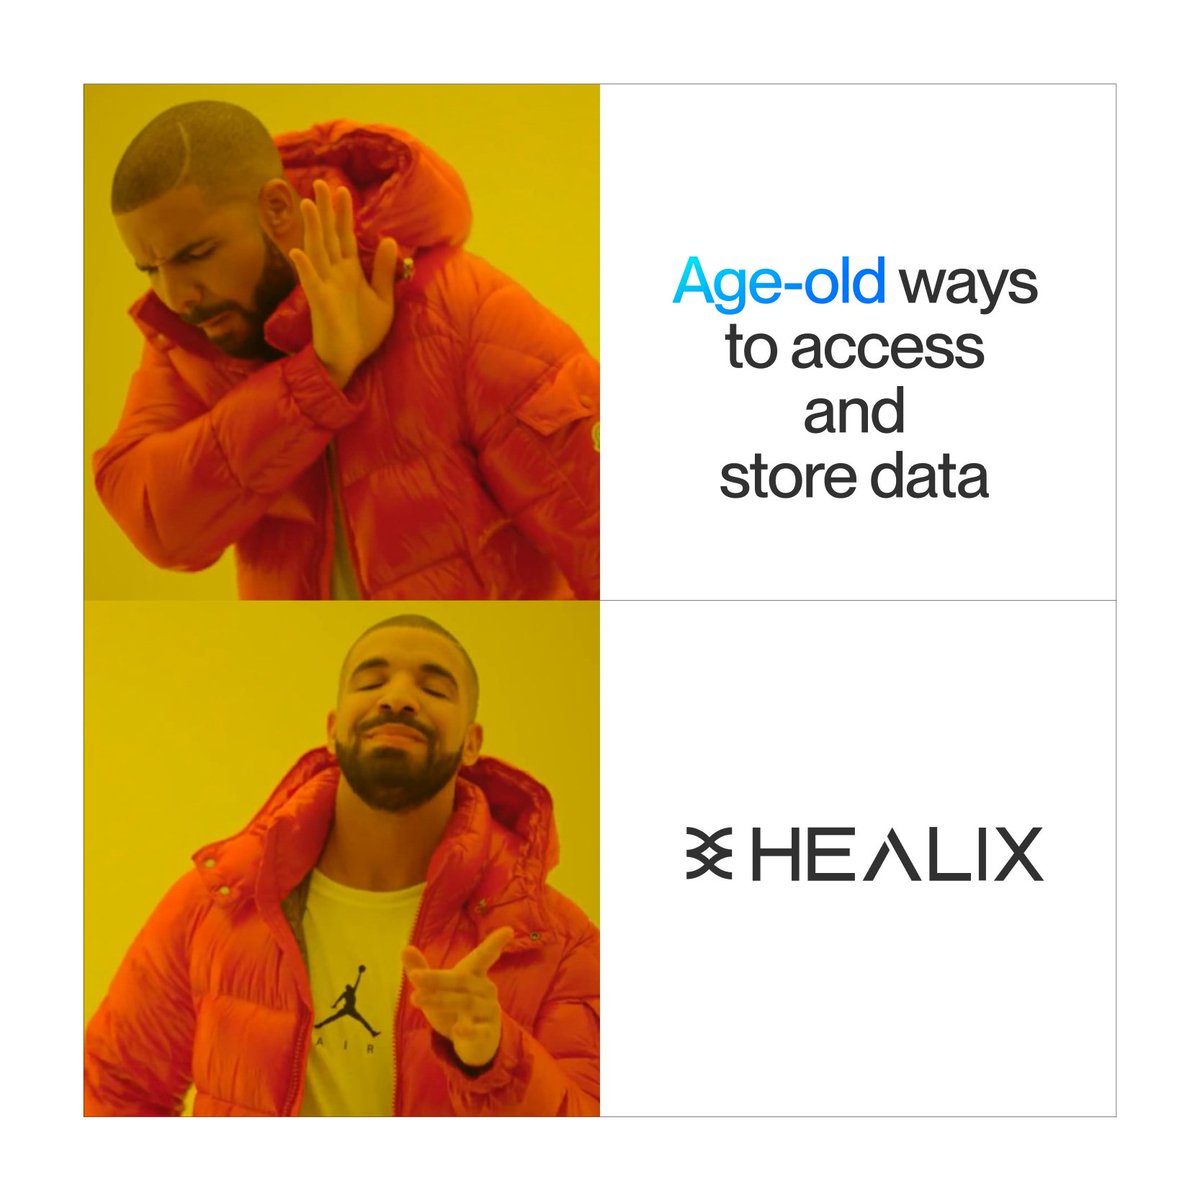 Healix is paving the way for a data revolution through #BlockchainTechnology transforming how we access and store #healthcare data